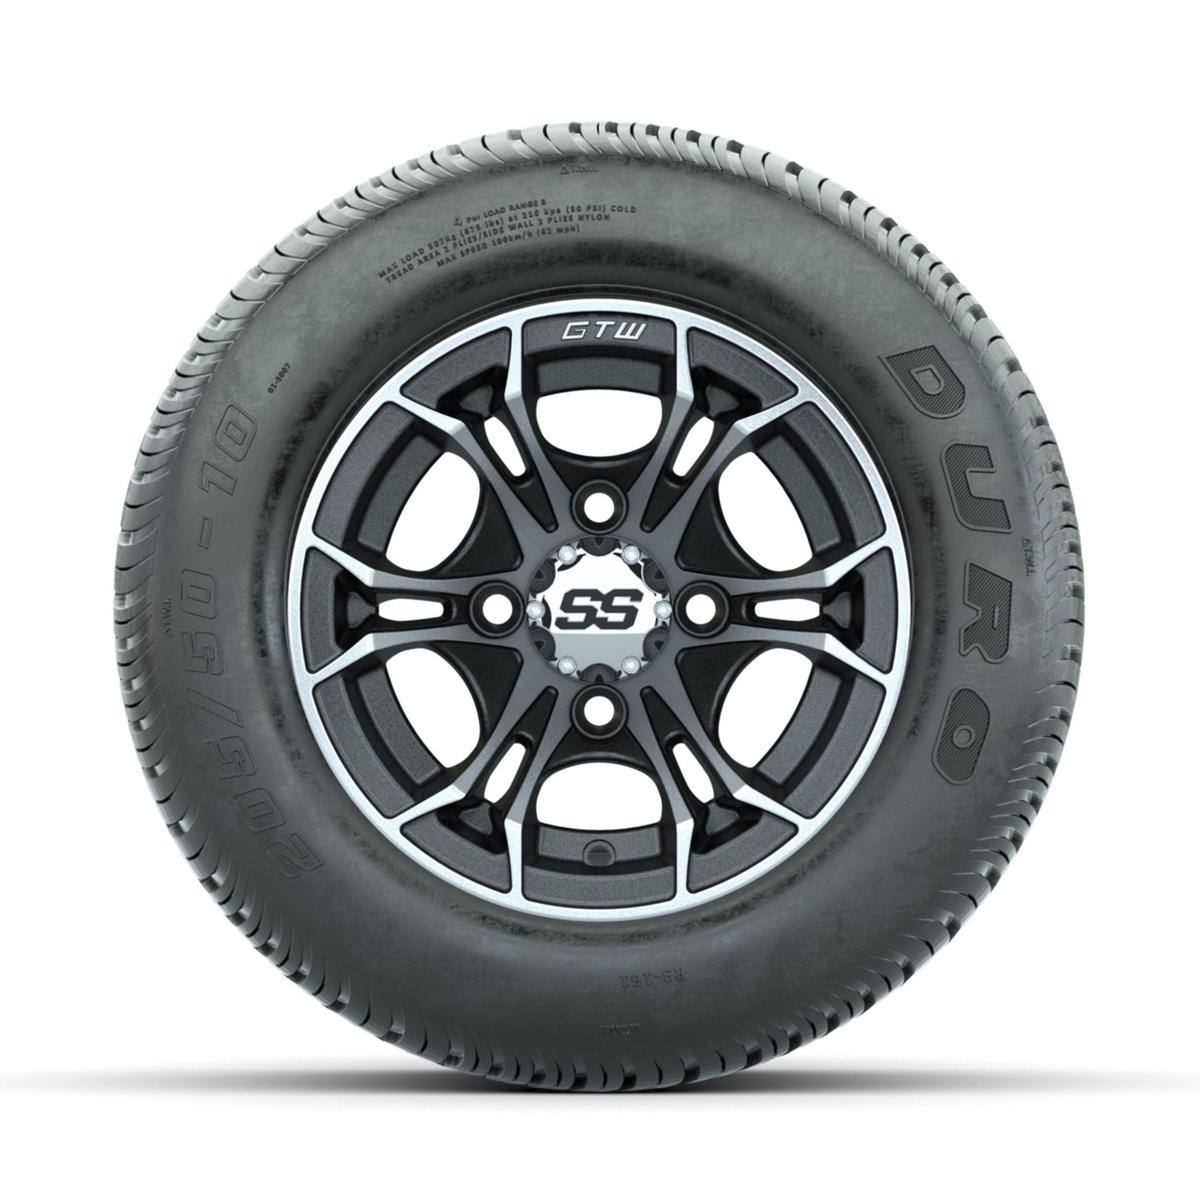 GTW Spyder Machined/Matte Grey 10 in Wheels with 205/50-10 Duro Low-profile Tires – Full Set